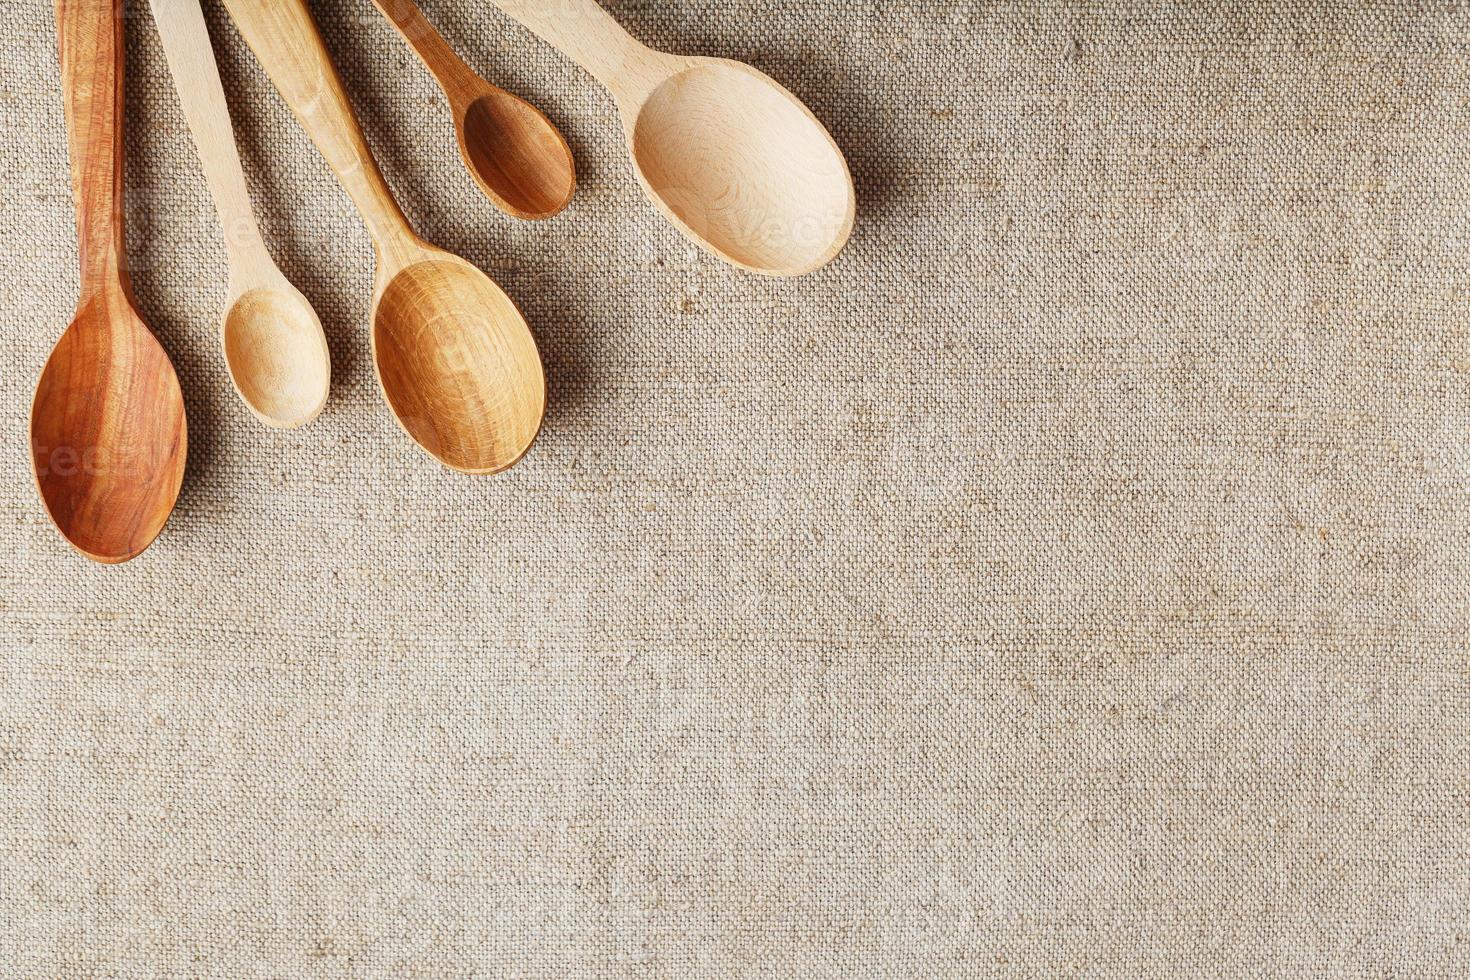 Wooden spoons made of natural wood on burlap fabric as a craft. photo